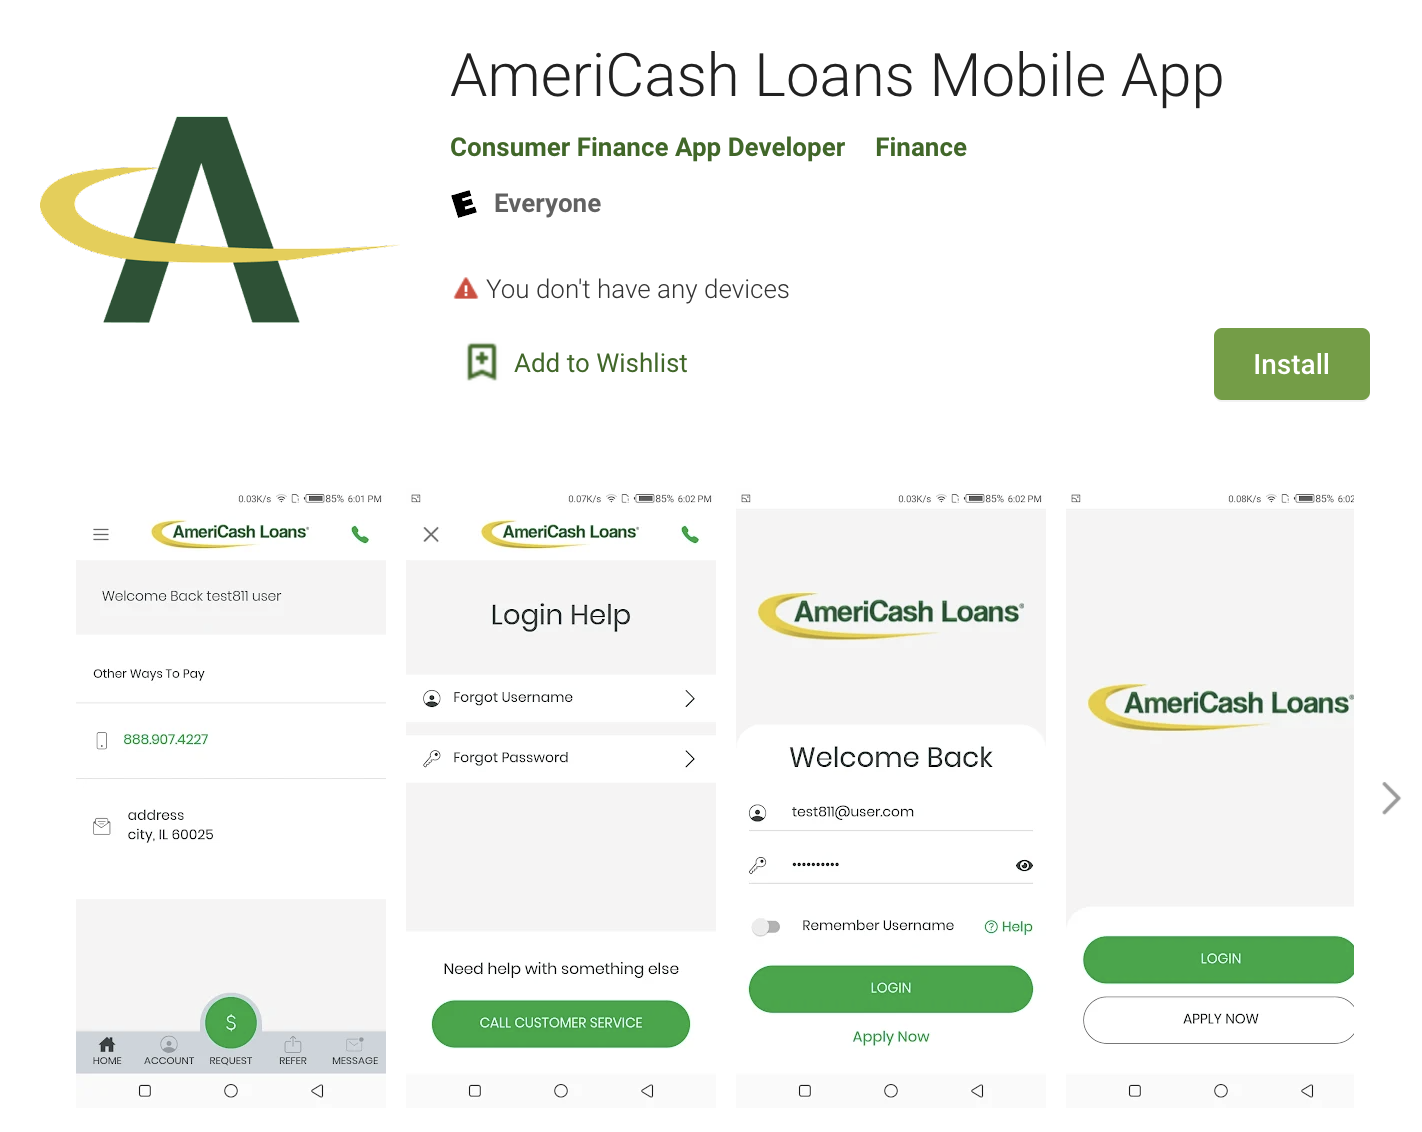 AmeriCash Loans Launches a Brand-New Mobile App